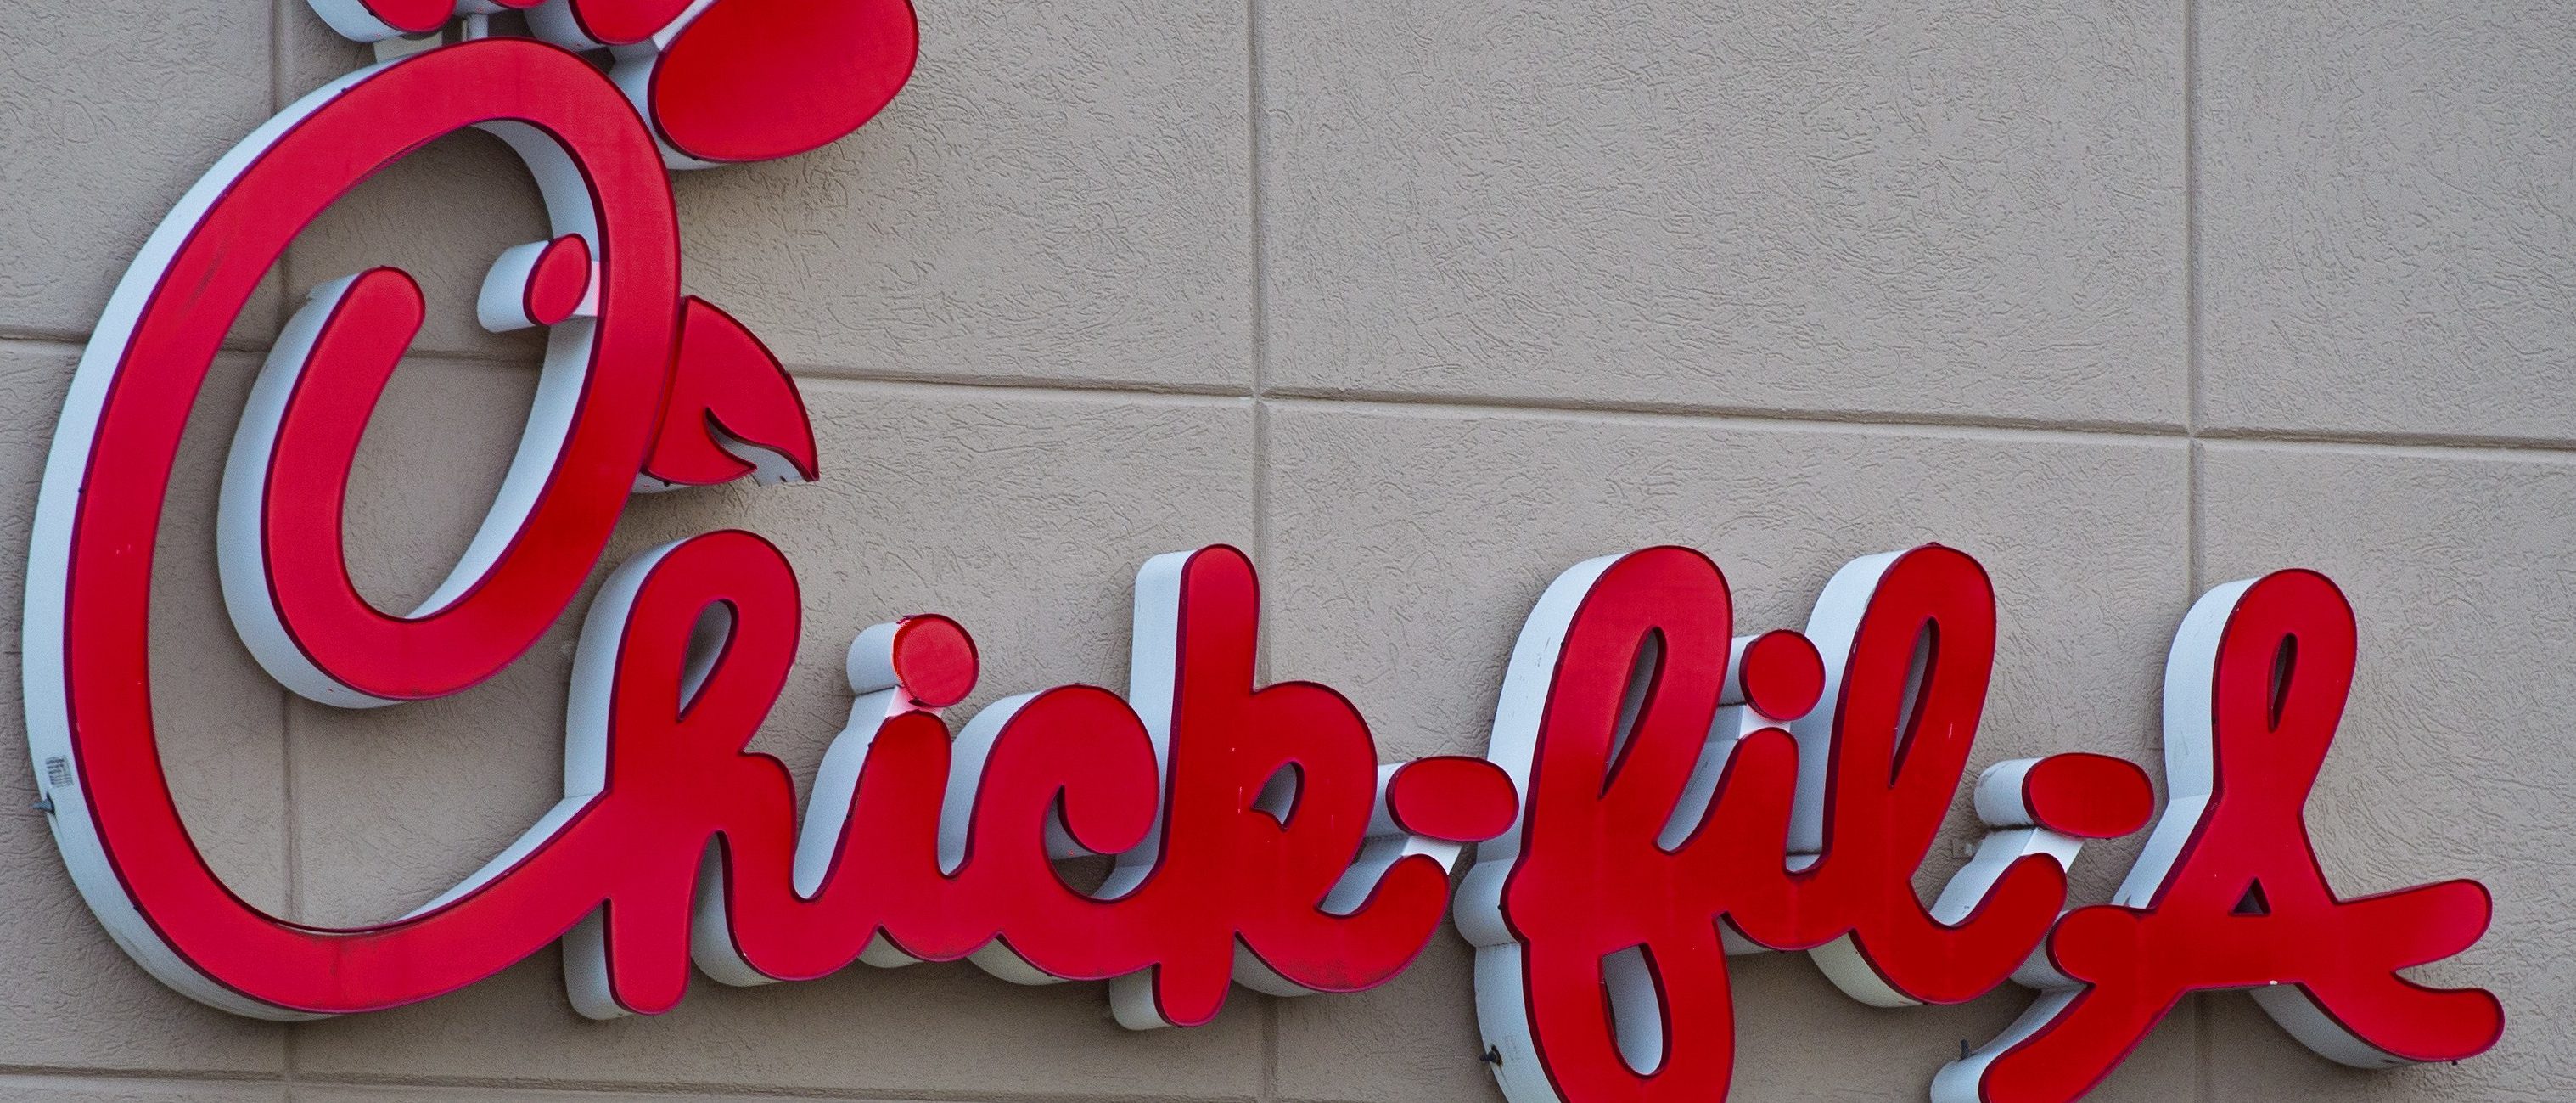 The Chick-fil-A restaurant is seen in Chantilly, Virginia on January 2, 2015. (Photo by PAUL J. RICHARDS/AFP/Getty Images)